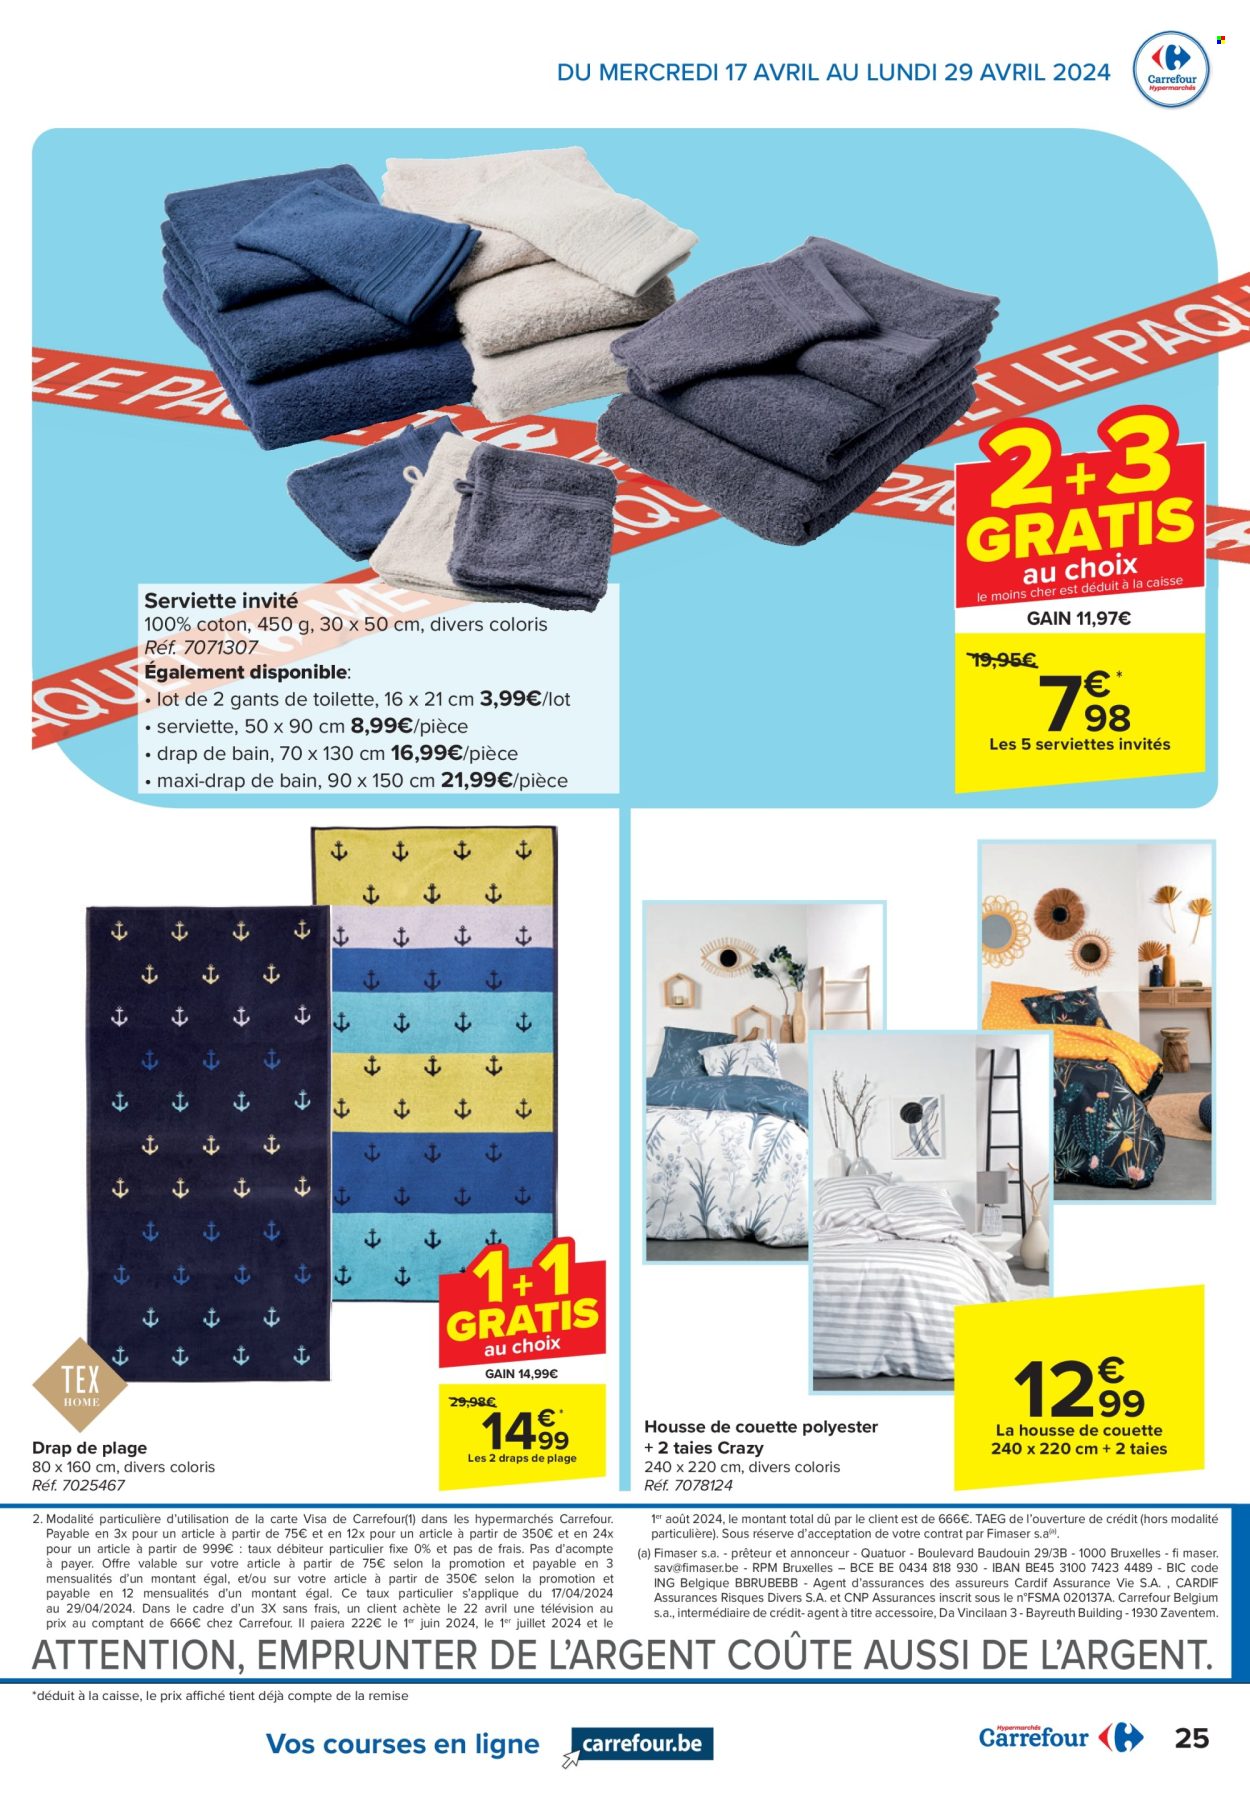 Catalogue Carrefour hypermarkt - 17.4.2024 - 29.4.2024. Page 25.